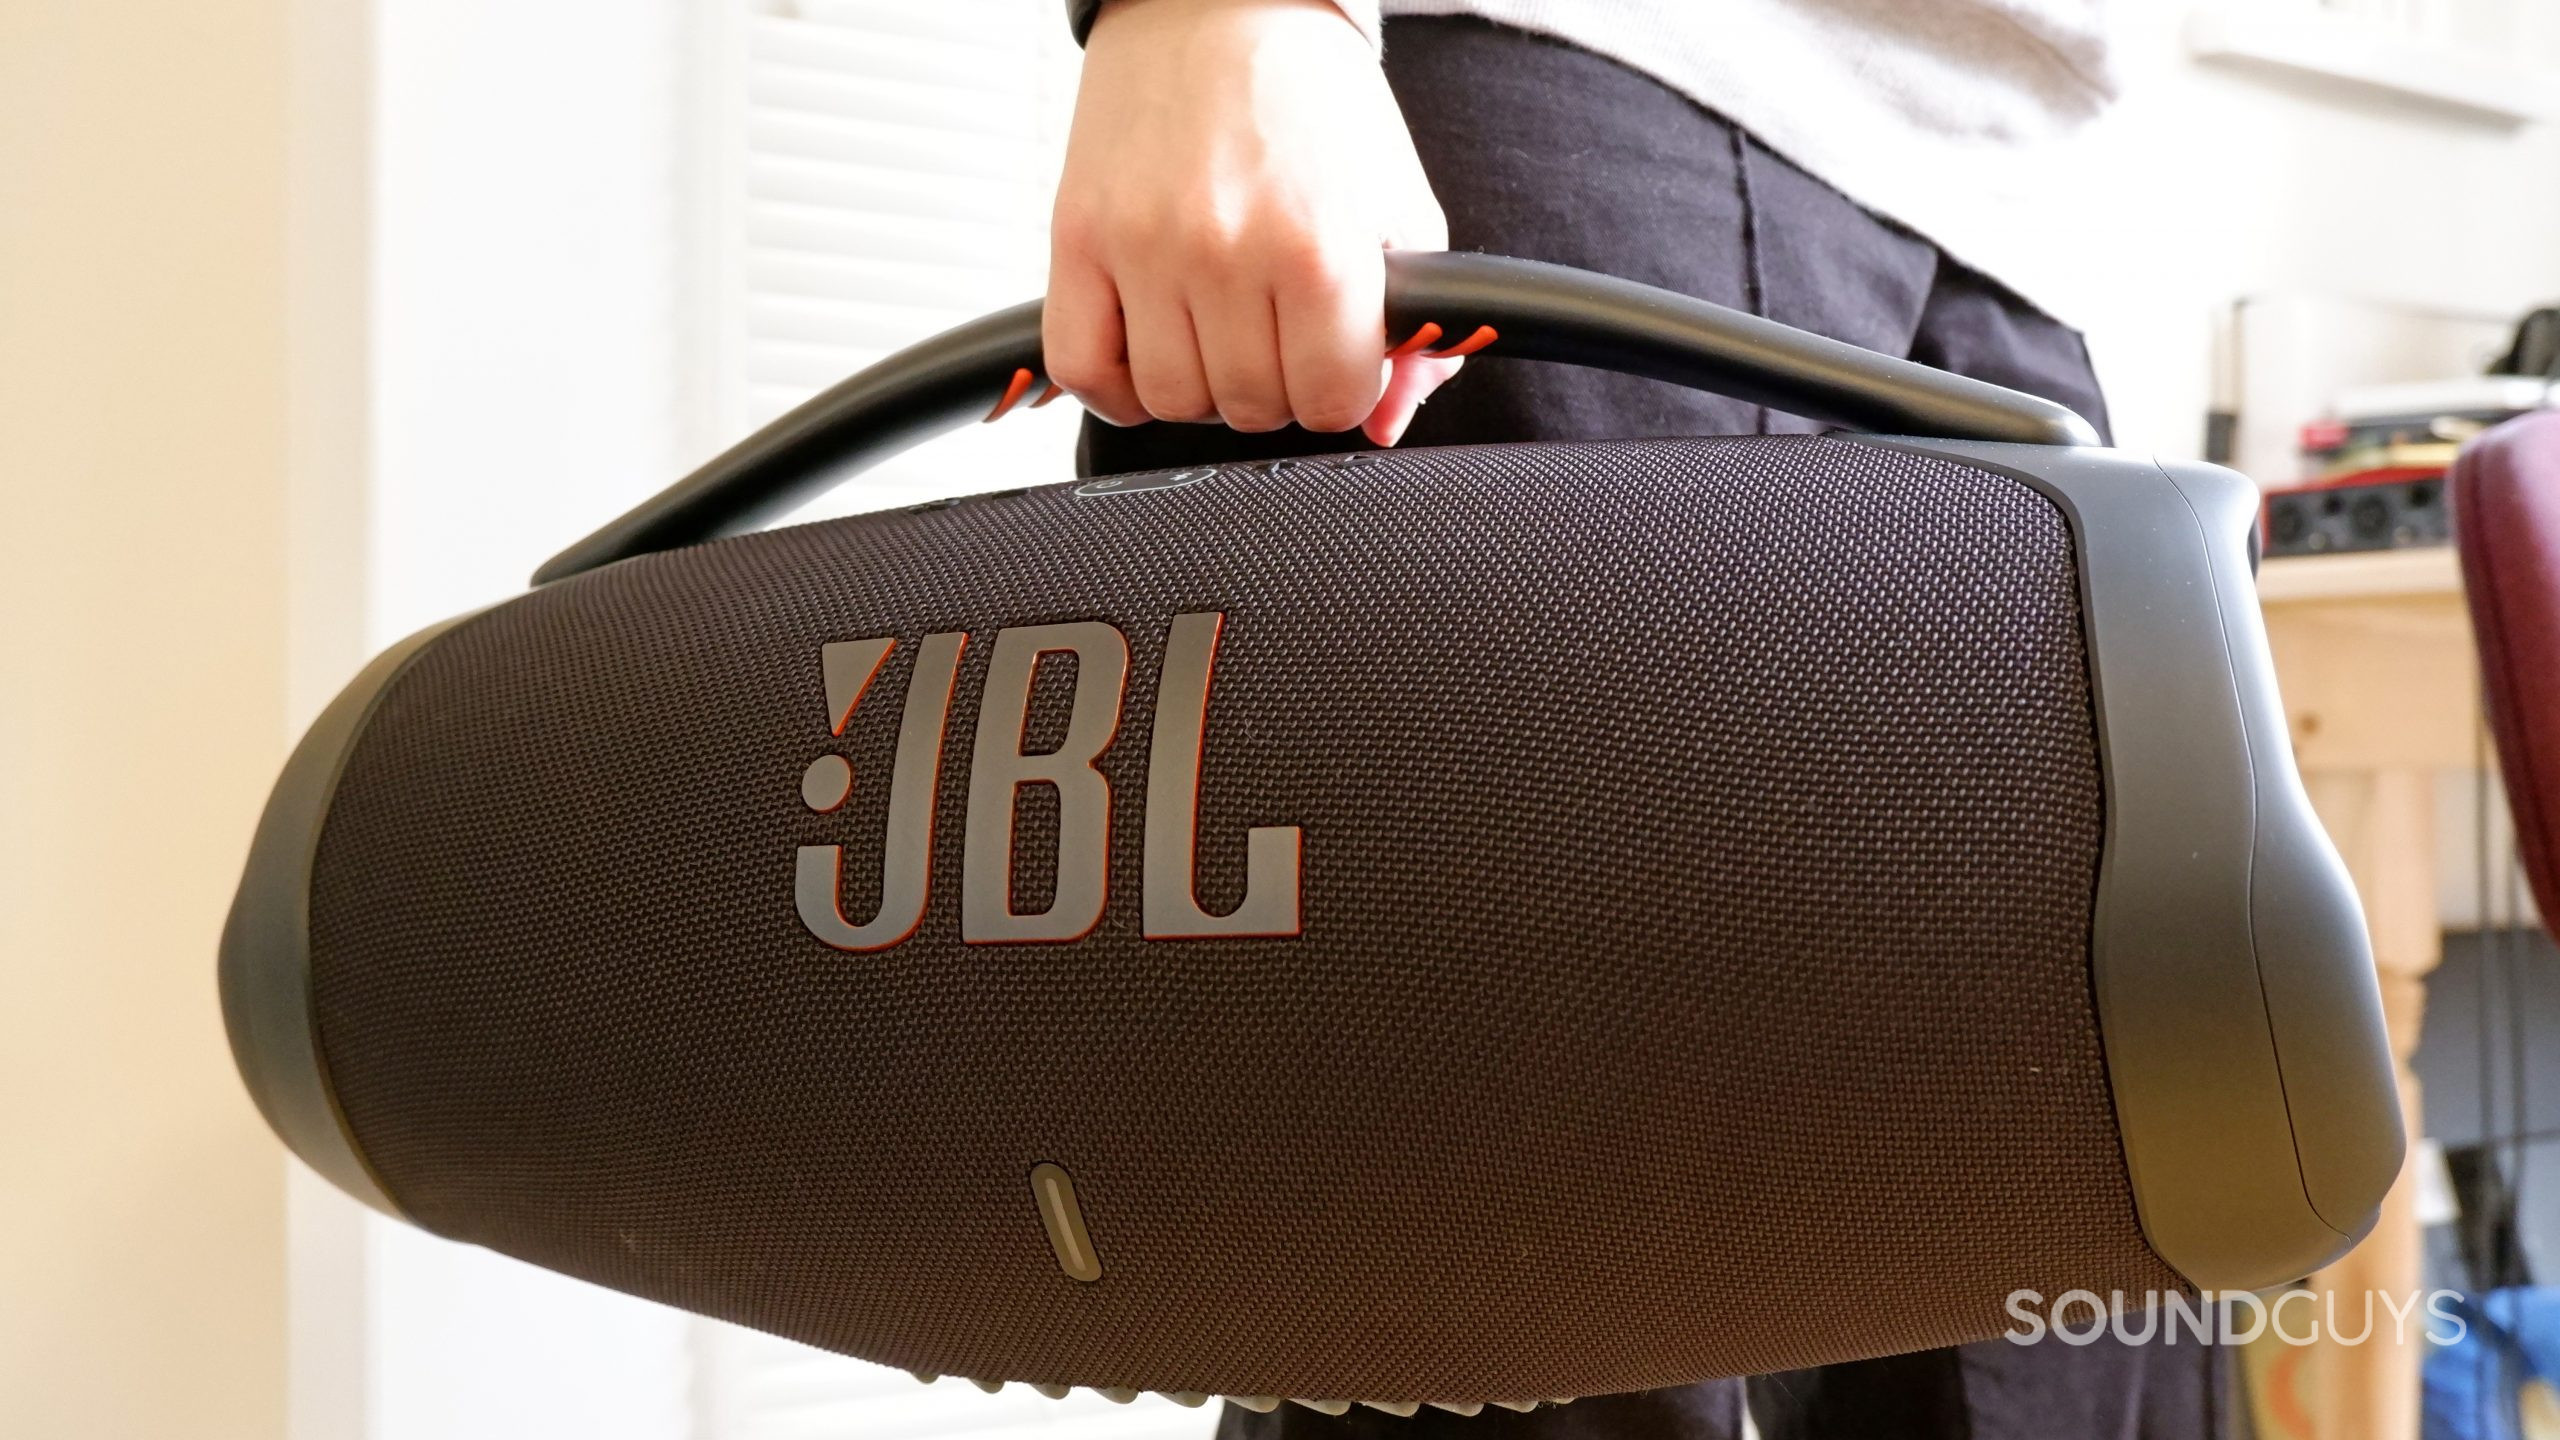 The JBL Boombox 3 being carried by the handle.